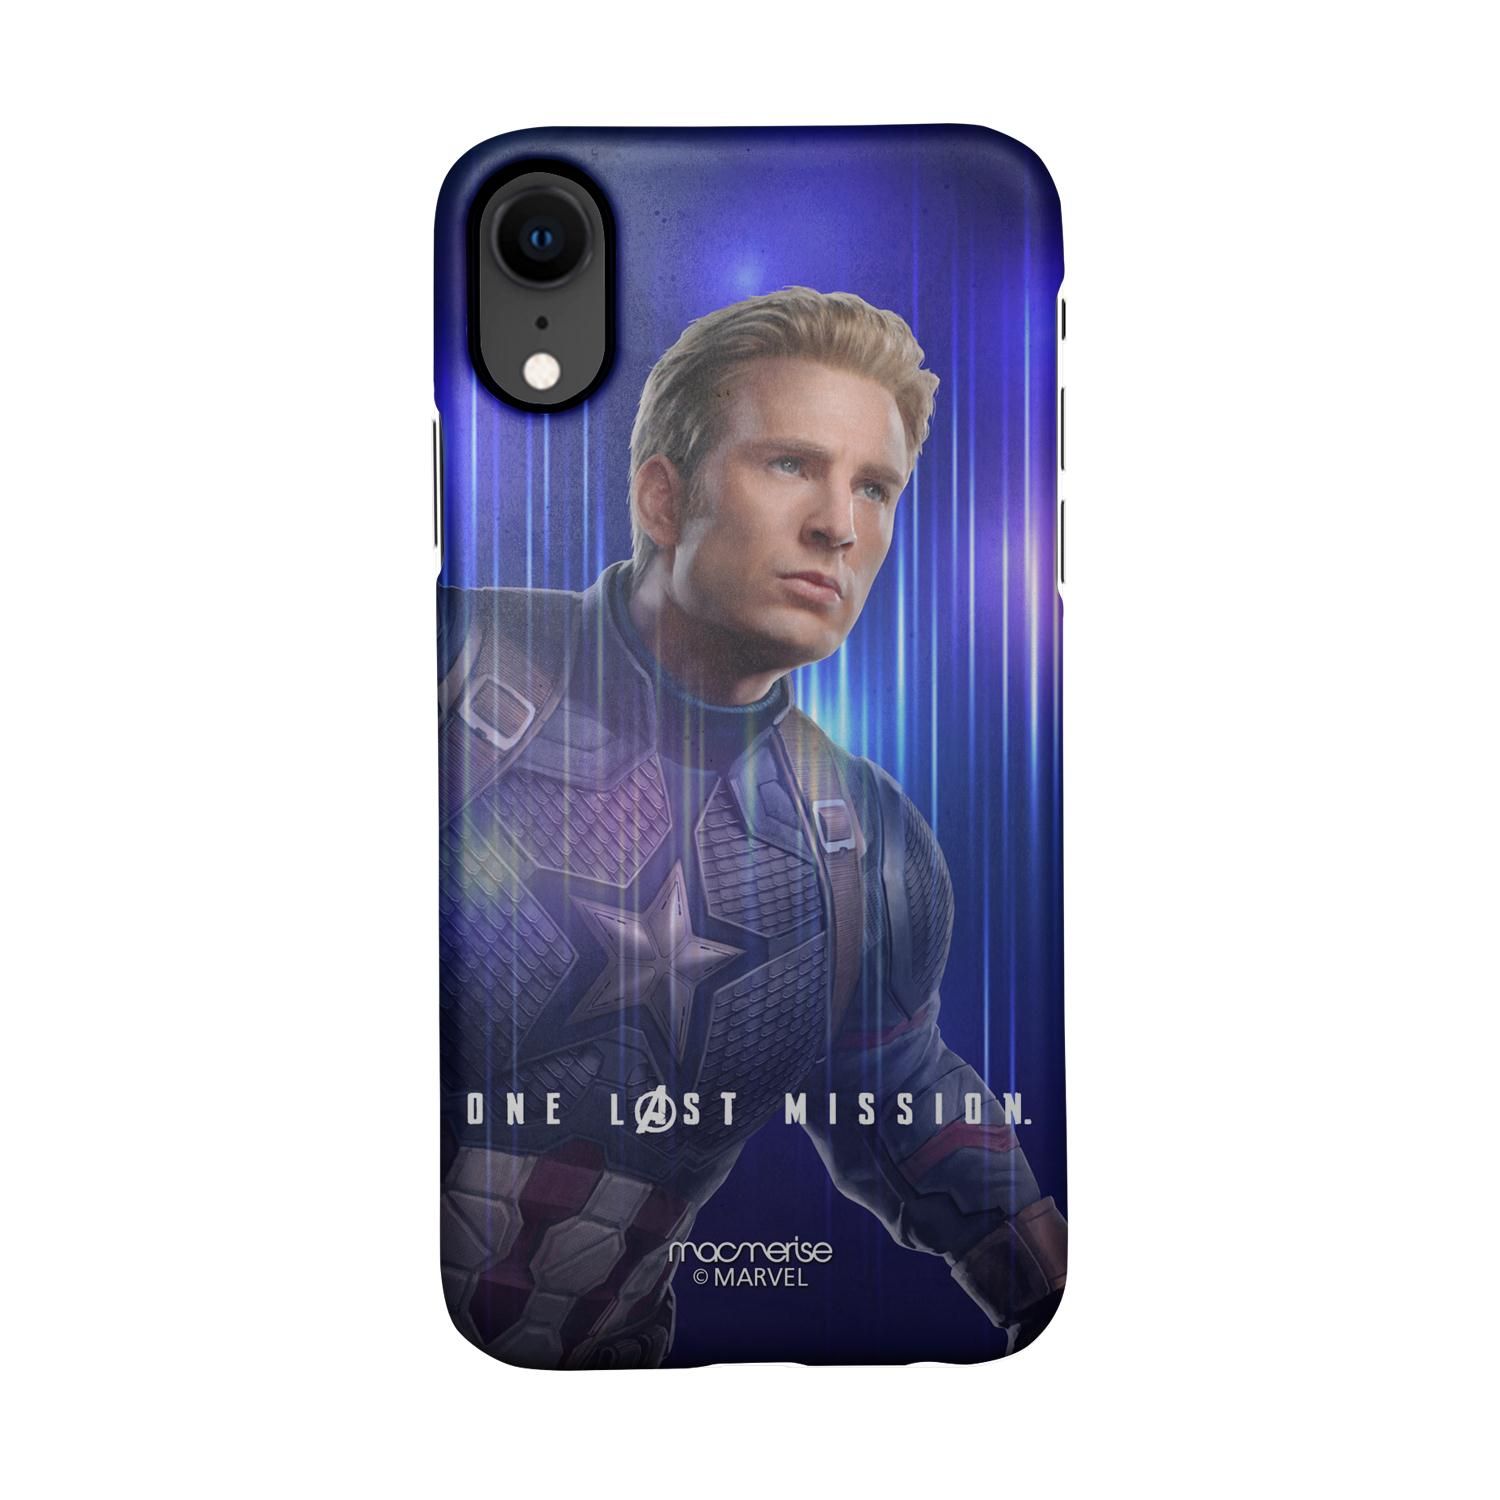 Buy One Last Mission - Sleek Phone Case for iPhone XR Online